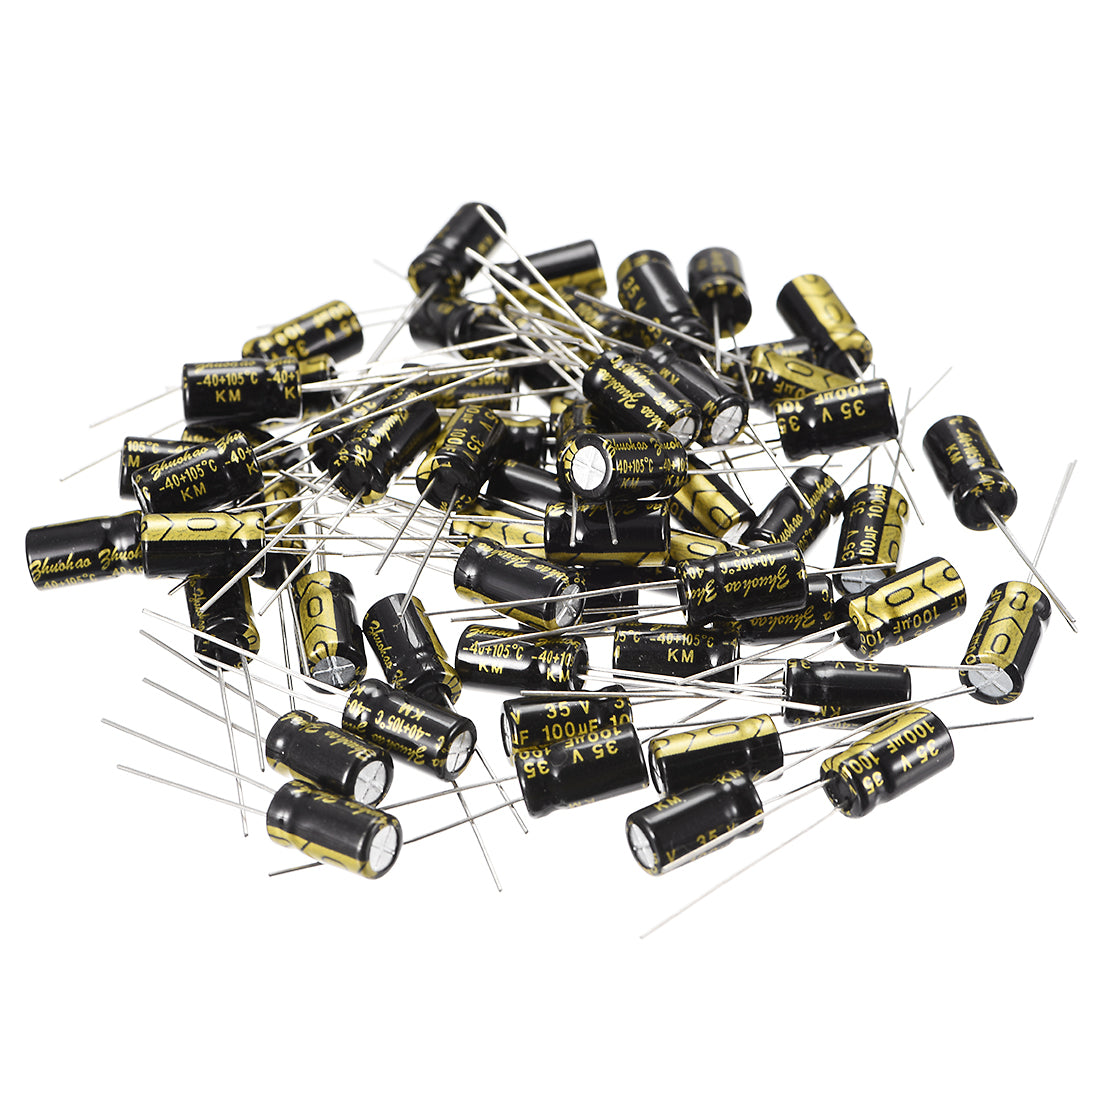 uxcell Uxcell Aluminum Radial Electrolytic Capacitor with 100uF 35V 105 Celsius Life 2000H 6.3 x 11 mm Black 50pcs